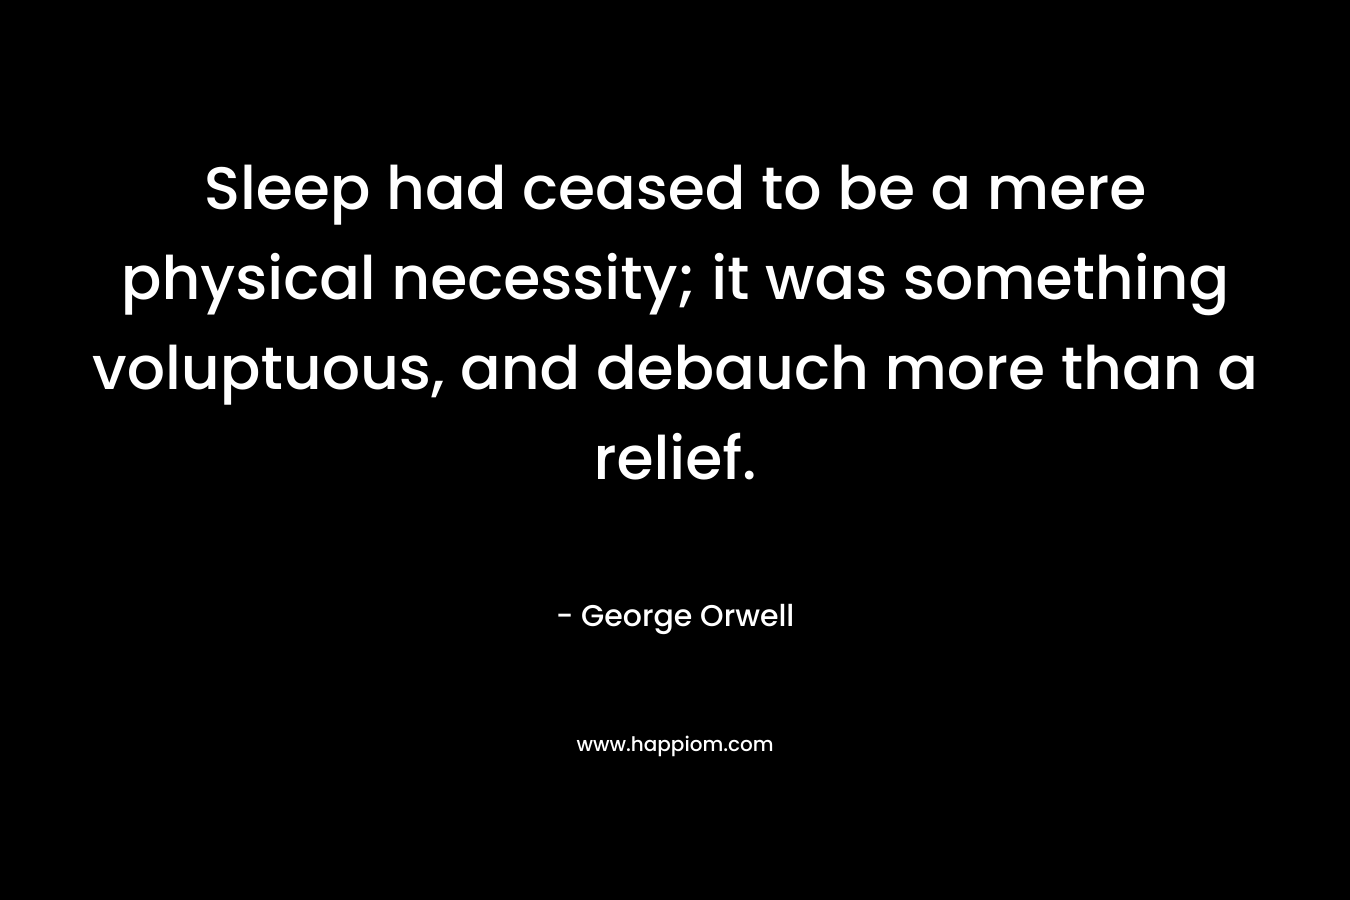 Sleep had ceased to be a mere physical necessity; it was something voluptuous, and debauch more than a relief. – George Orwell